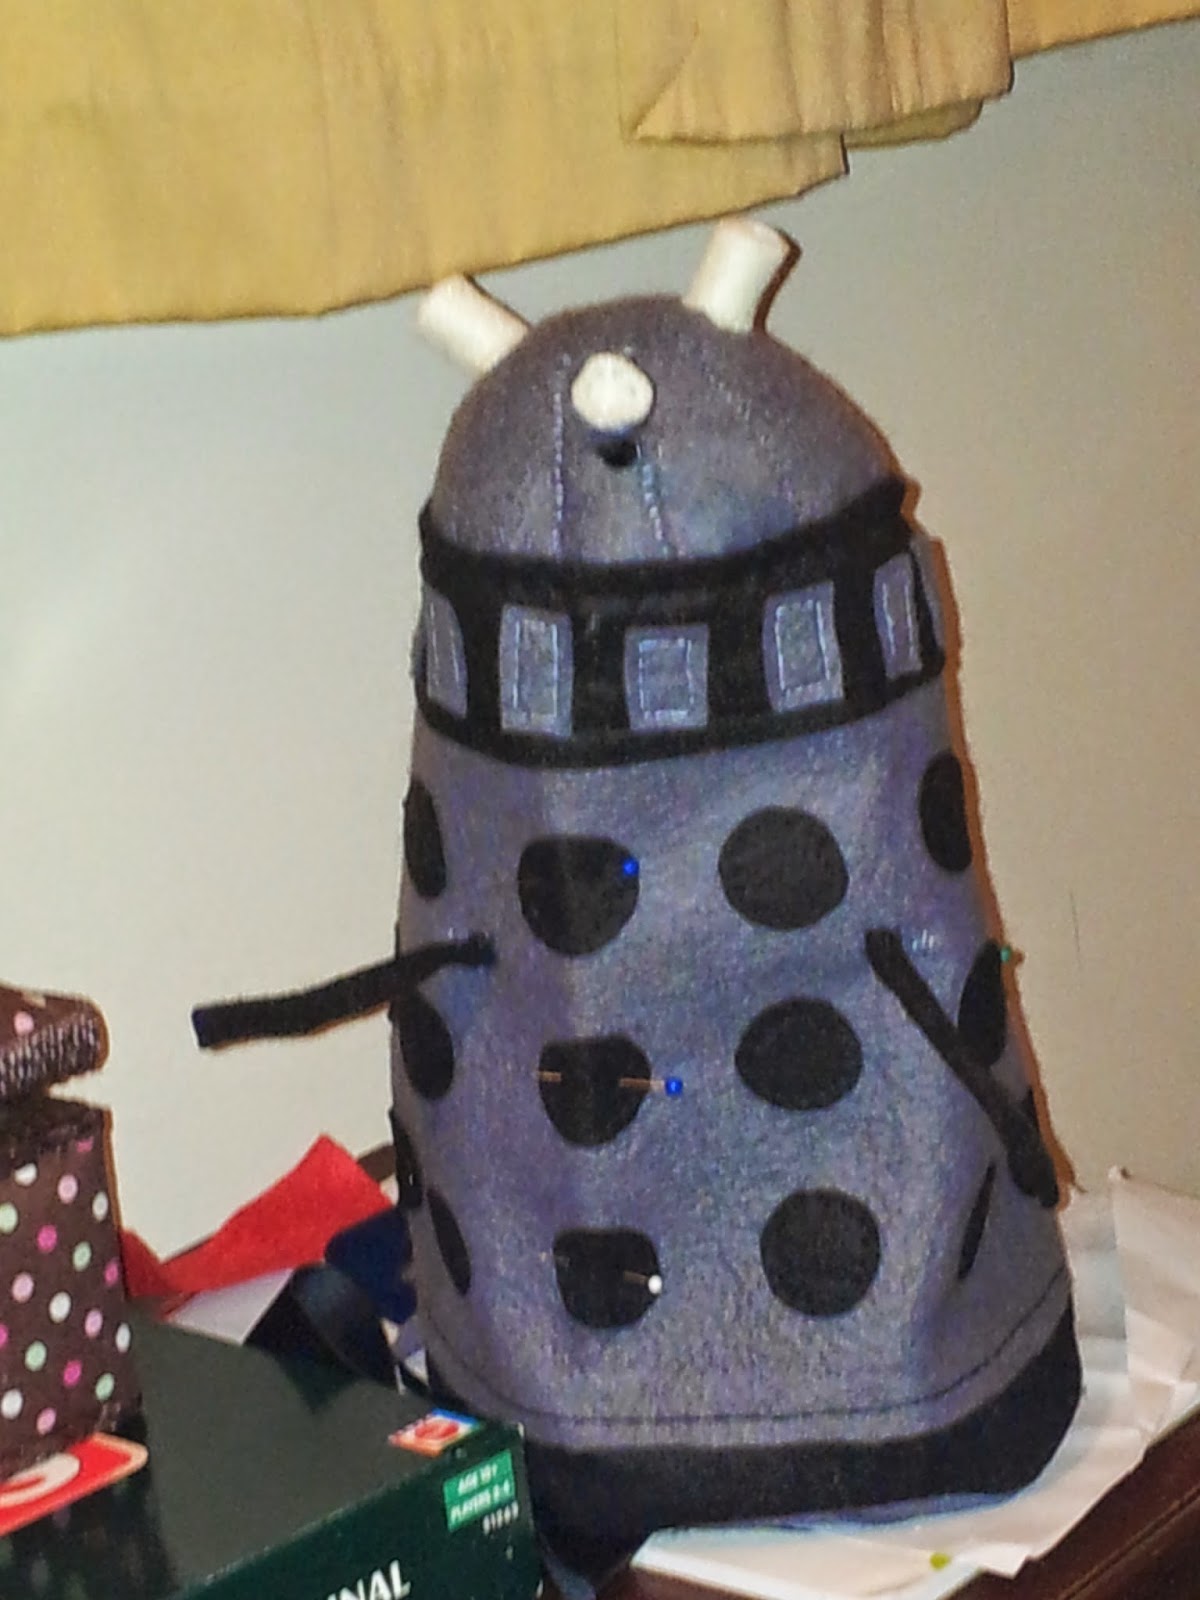 Nearly finished dalek with pipe cleaners pinned in to test to see if it helped give the dalek more strength